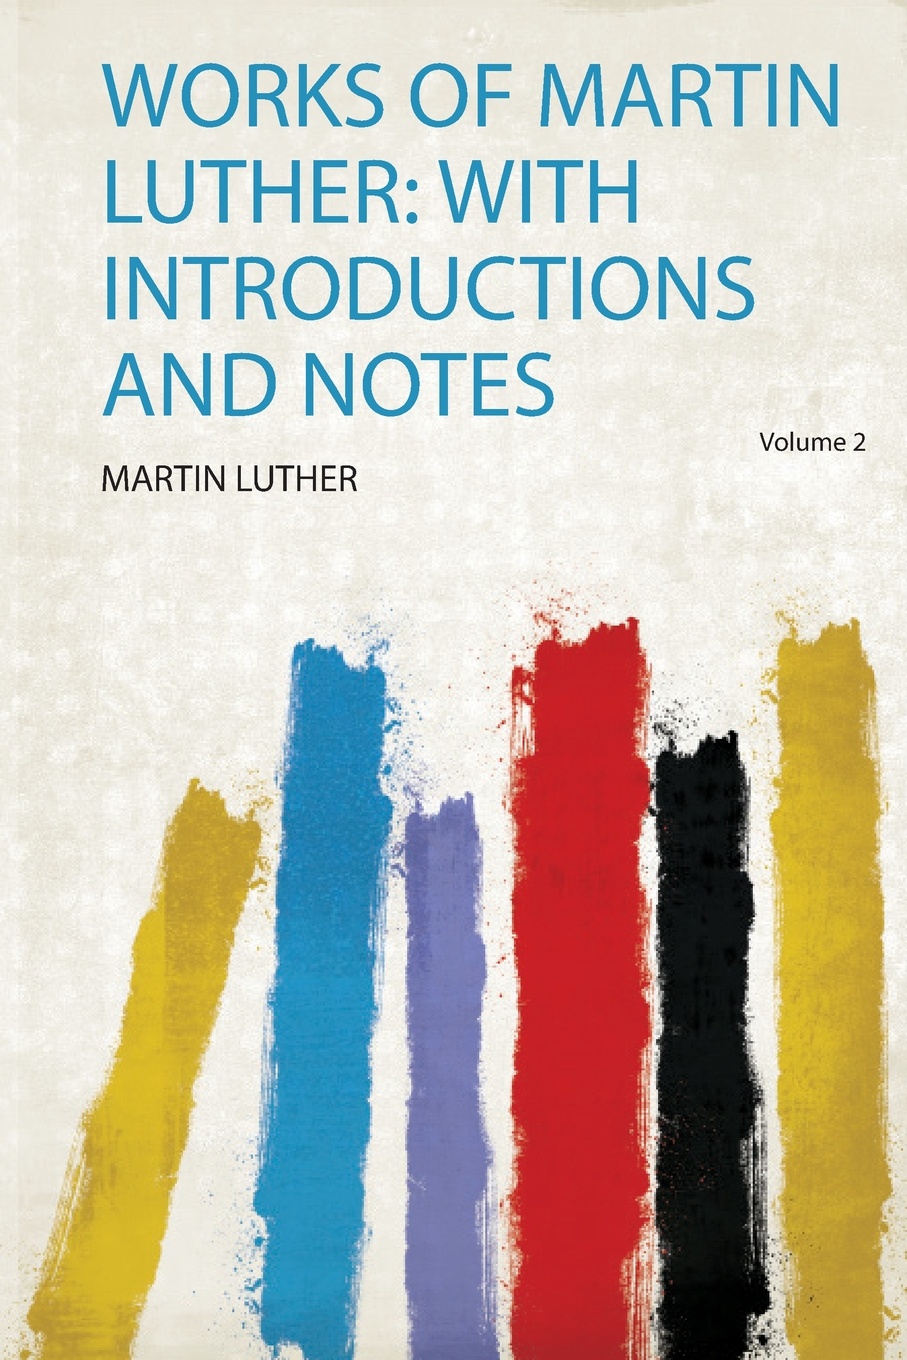 Works of Martin Luther. With Introductions and Notes